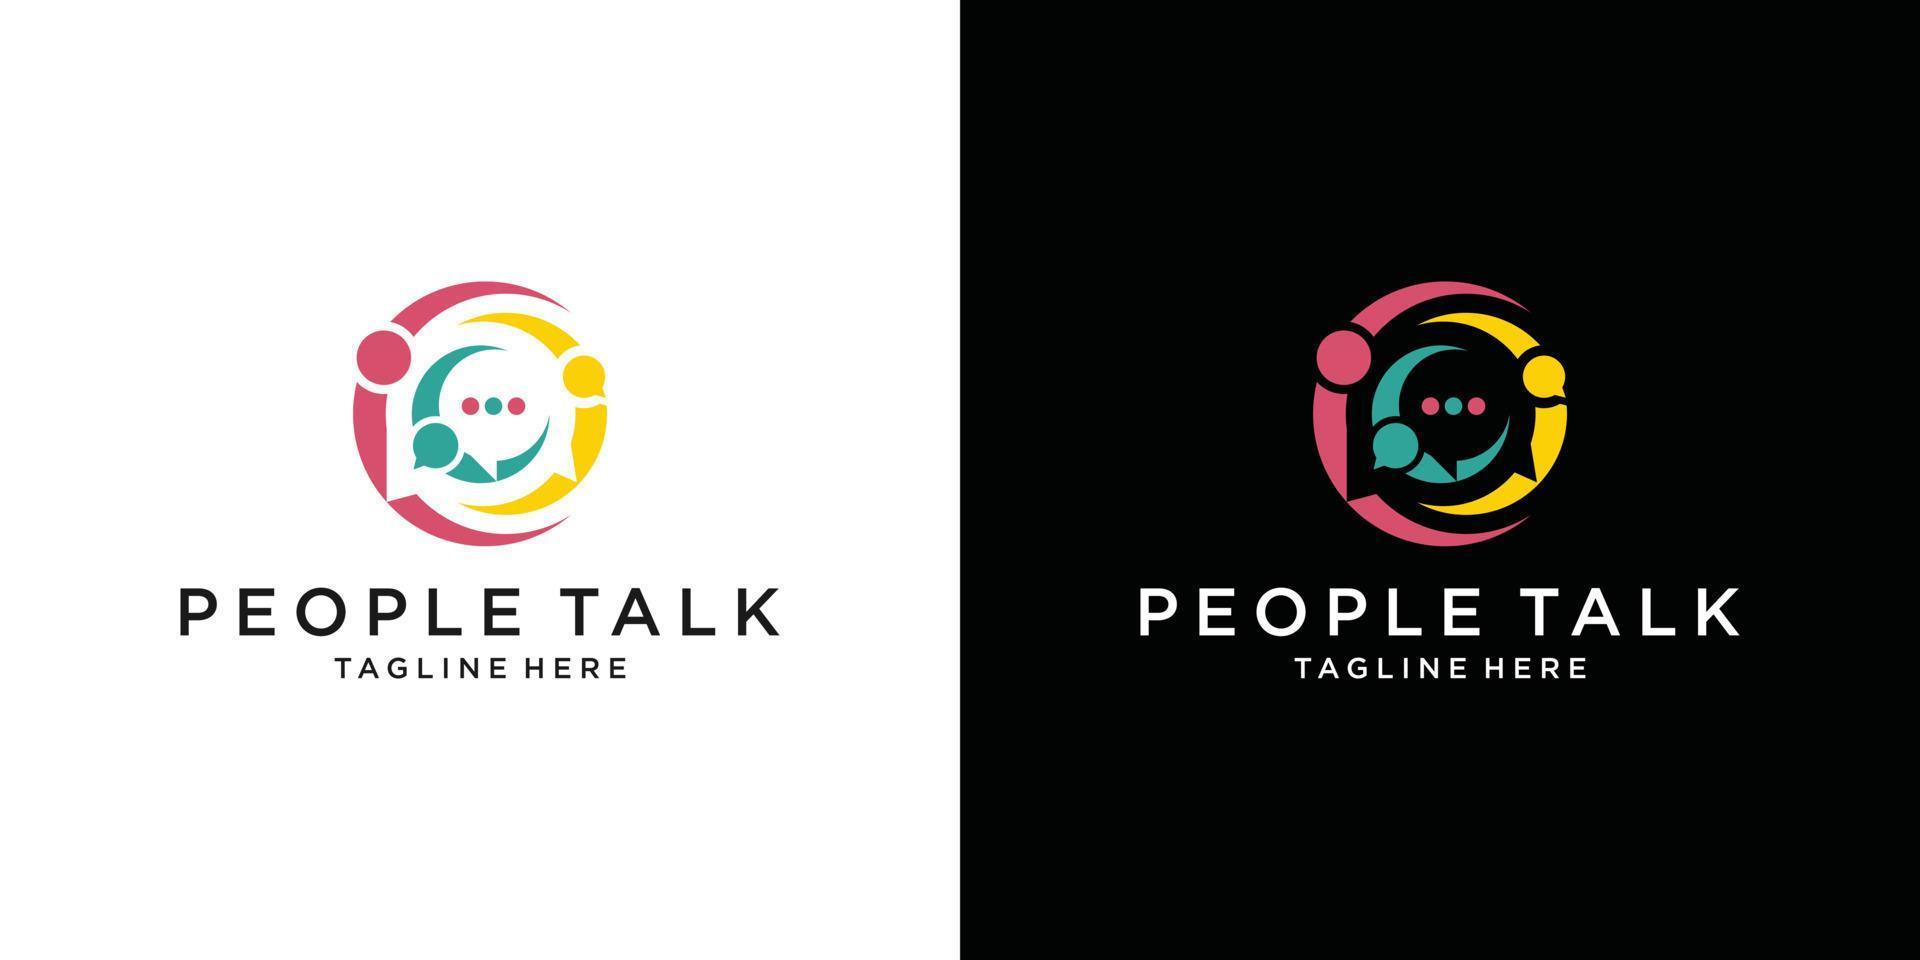 people talk with bubble chat logo design inspiration vector